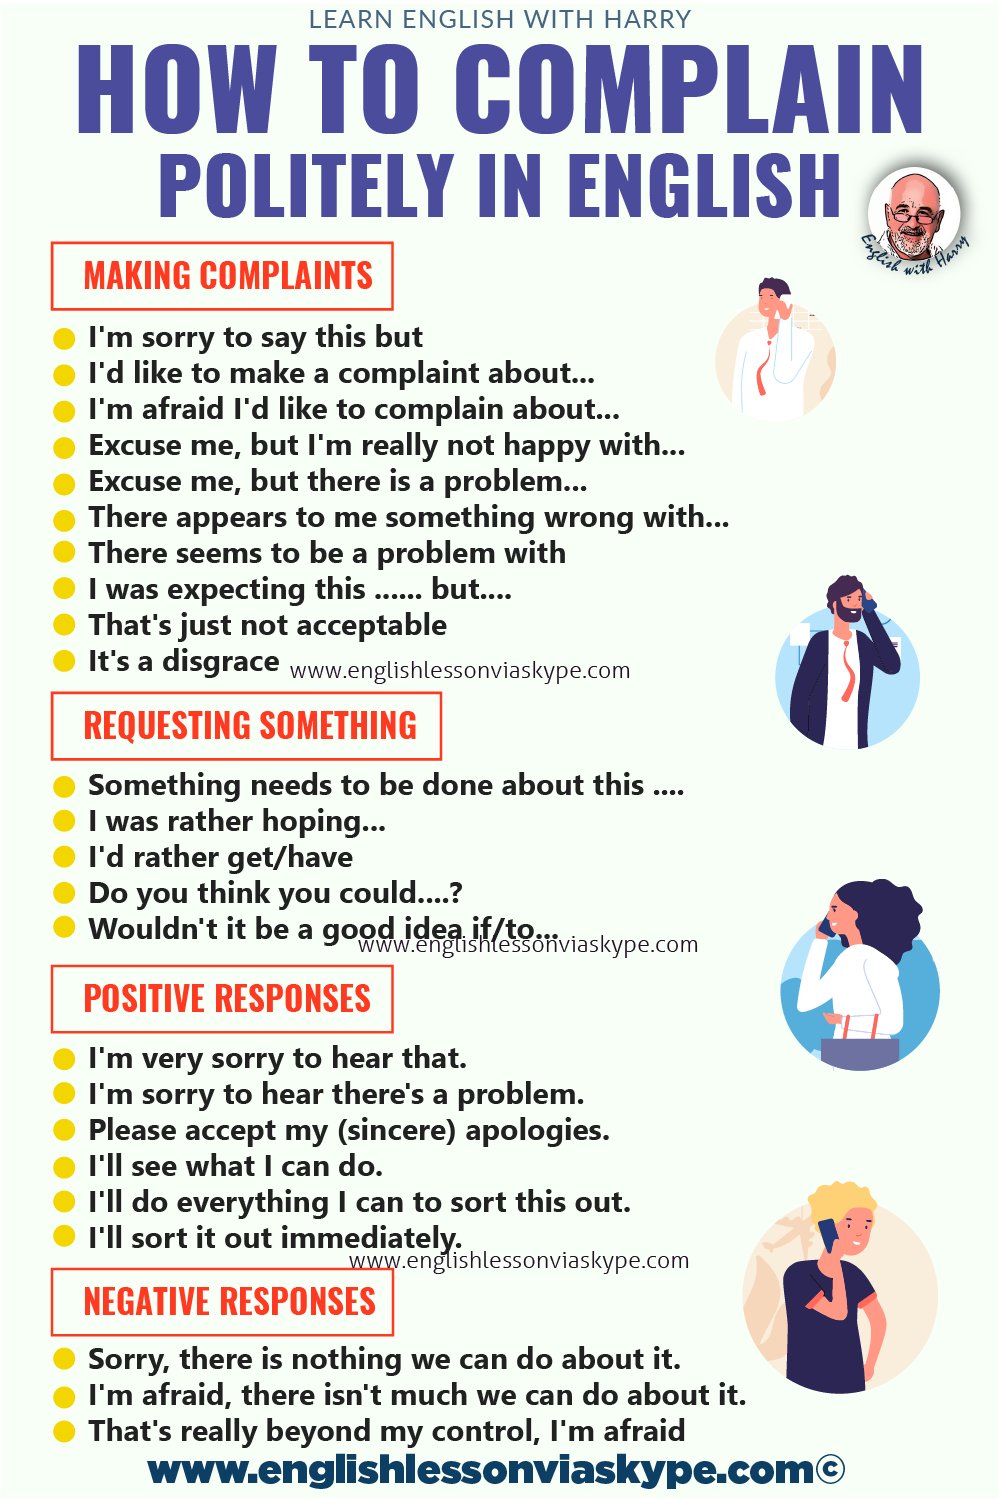 How to complain politely in English. Expressions for making a complaint in English. Advanced English learning. Online English lessons on Zoom at www.englishlessonviaskype.com #learnenglish #englishlessons #EnglishTeacher #vocabulary #ingles